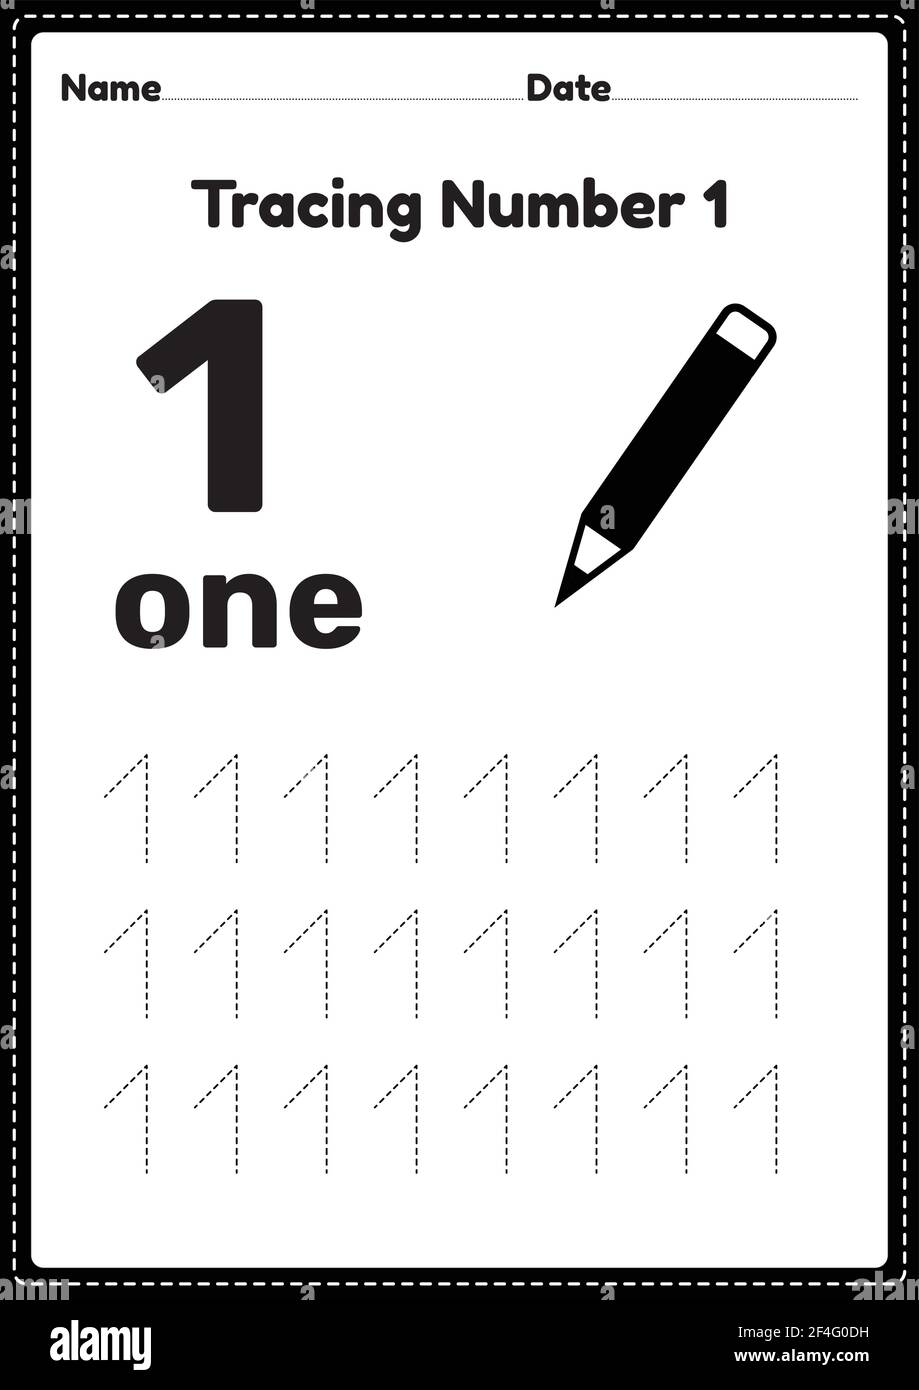 tracing number 1 worksheet for kindergarten and preschool kids for educational practice in a printable page stock vector image art alamy